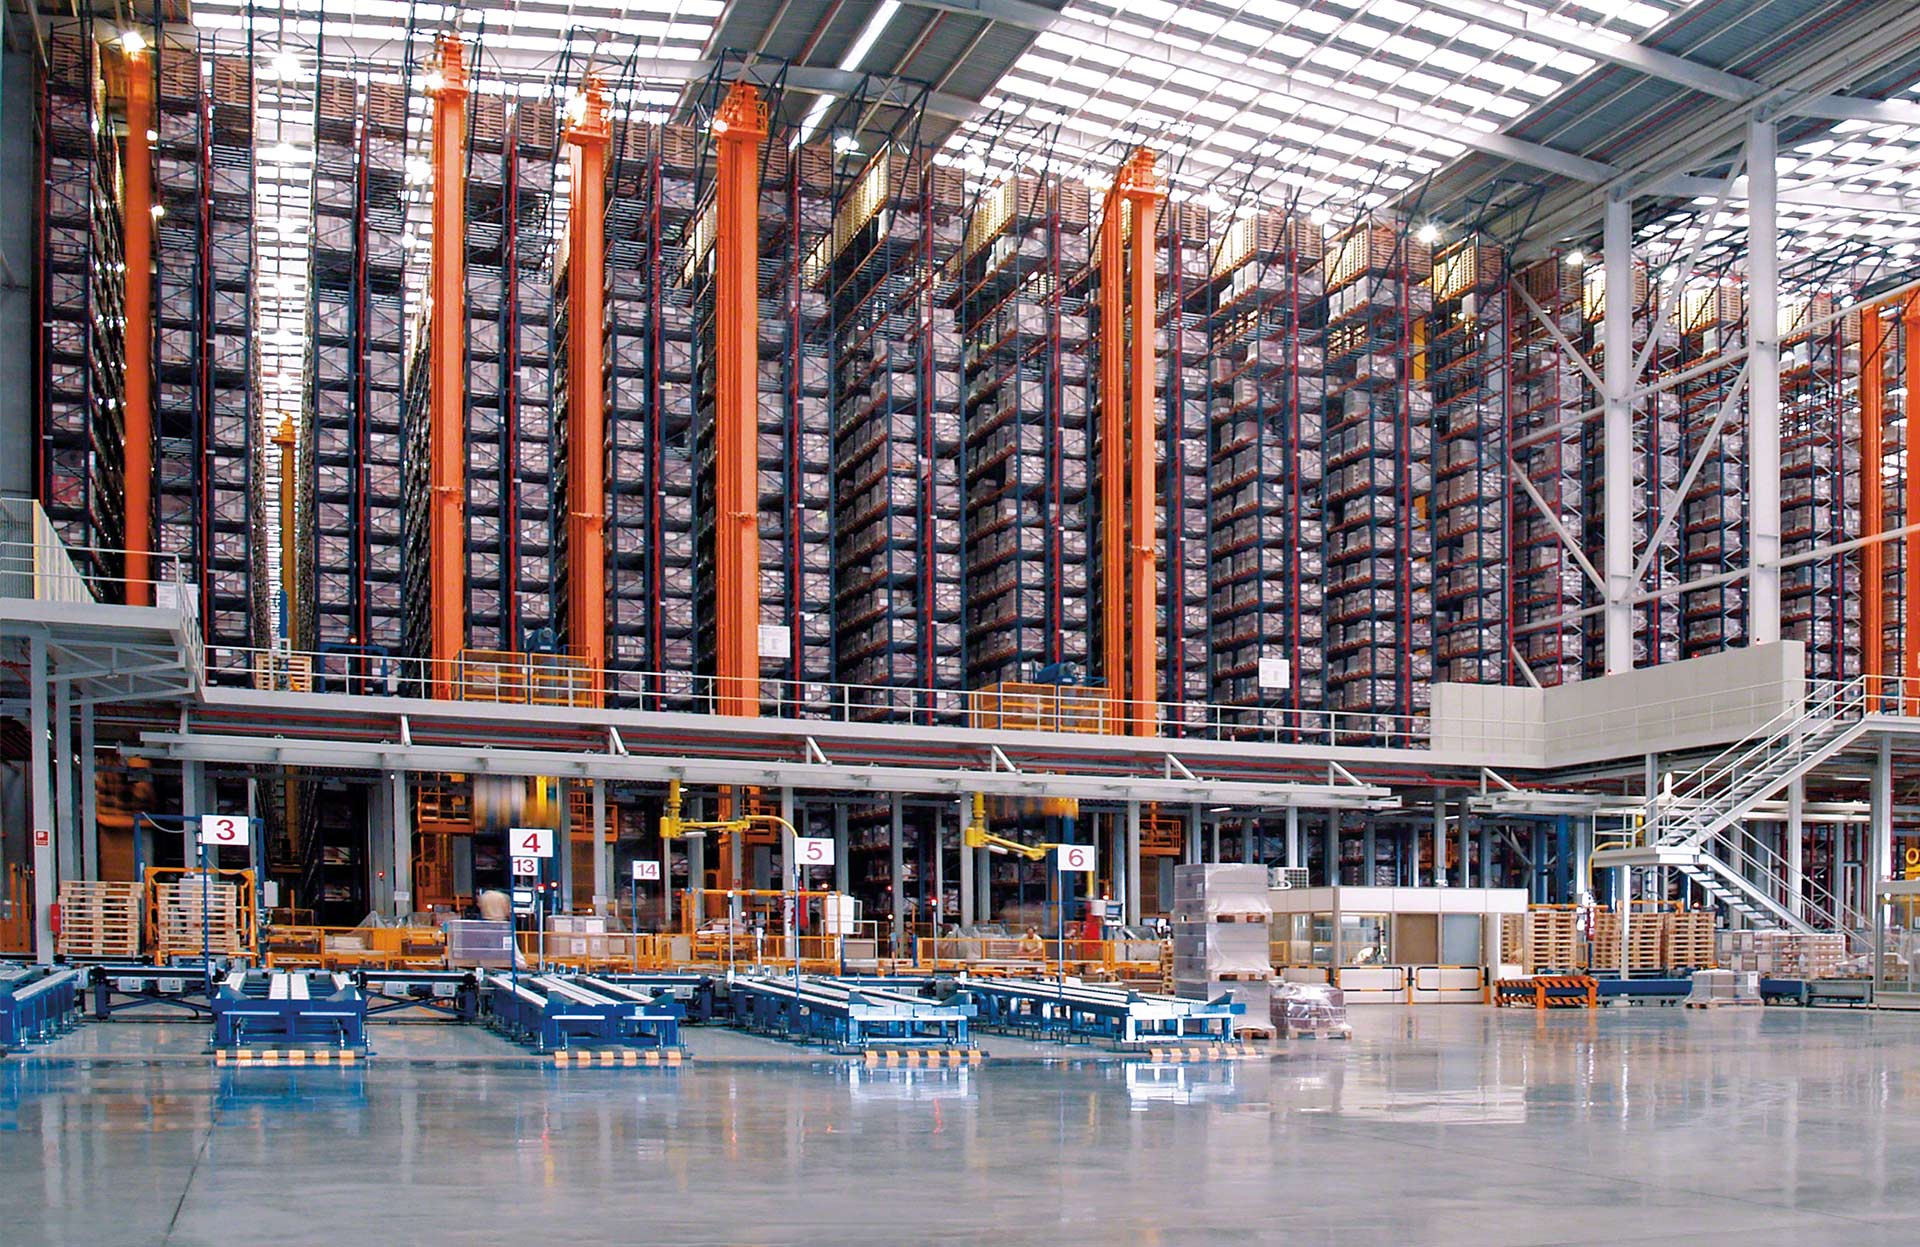 Stacker cranes increase warehouse throughput by automating pallet storage and retrieval